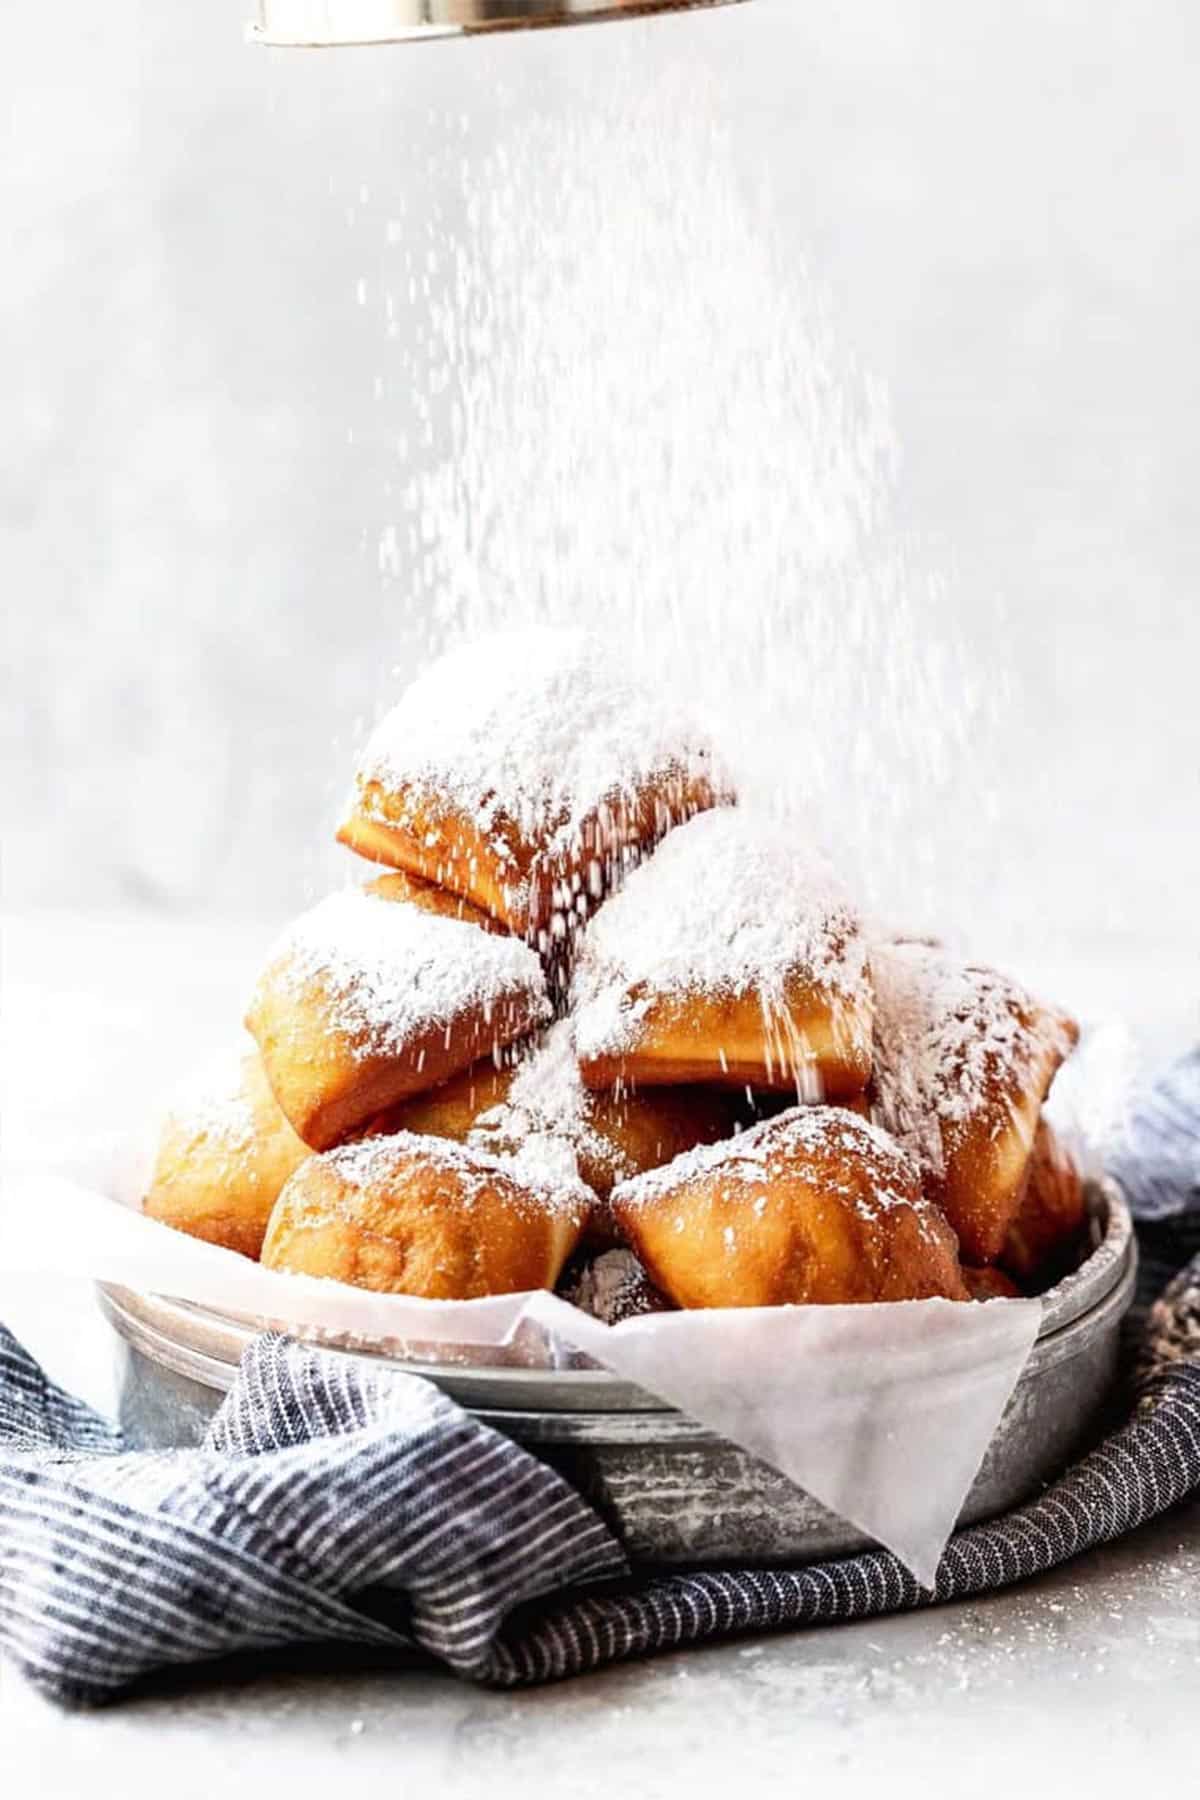 New Orleans beignets in a basket with powdered sugar sprinkled over top.